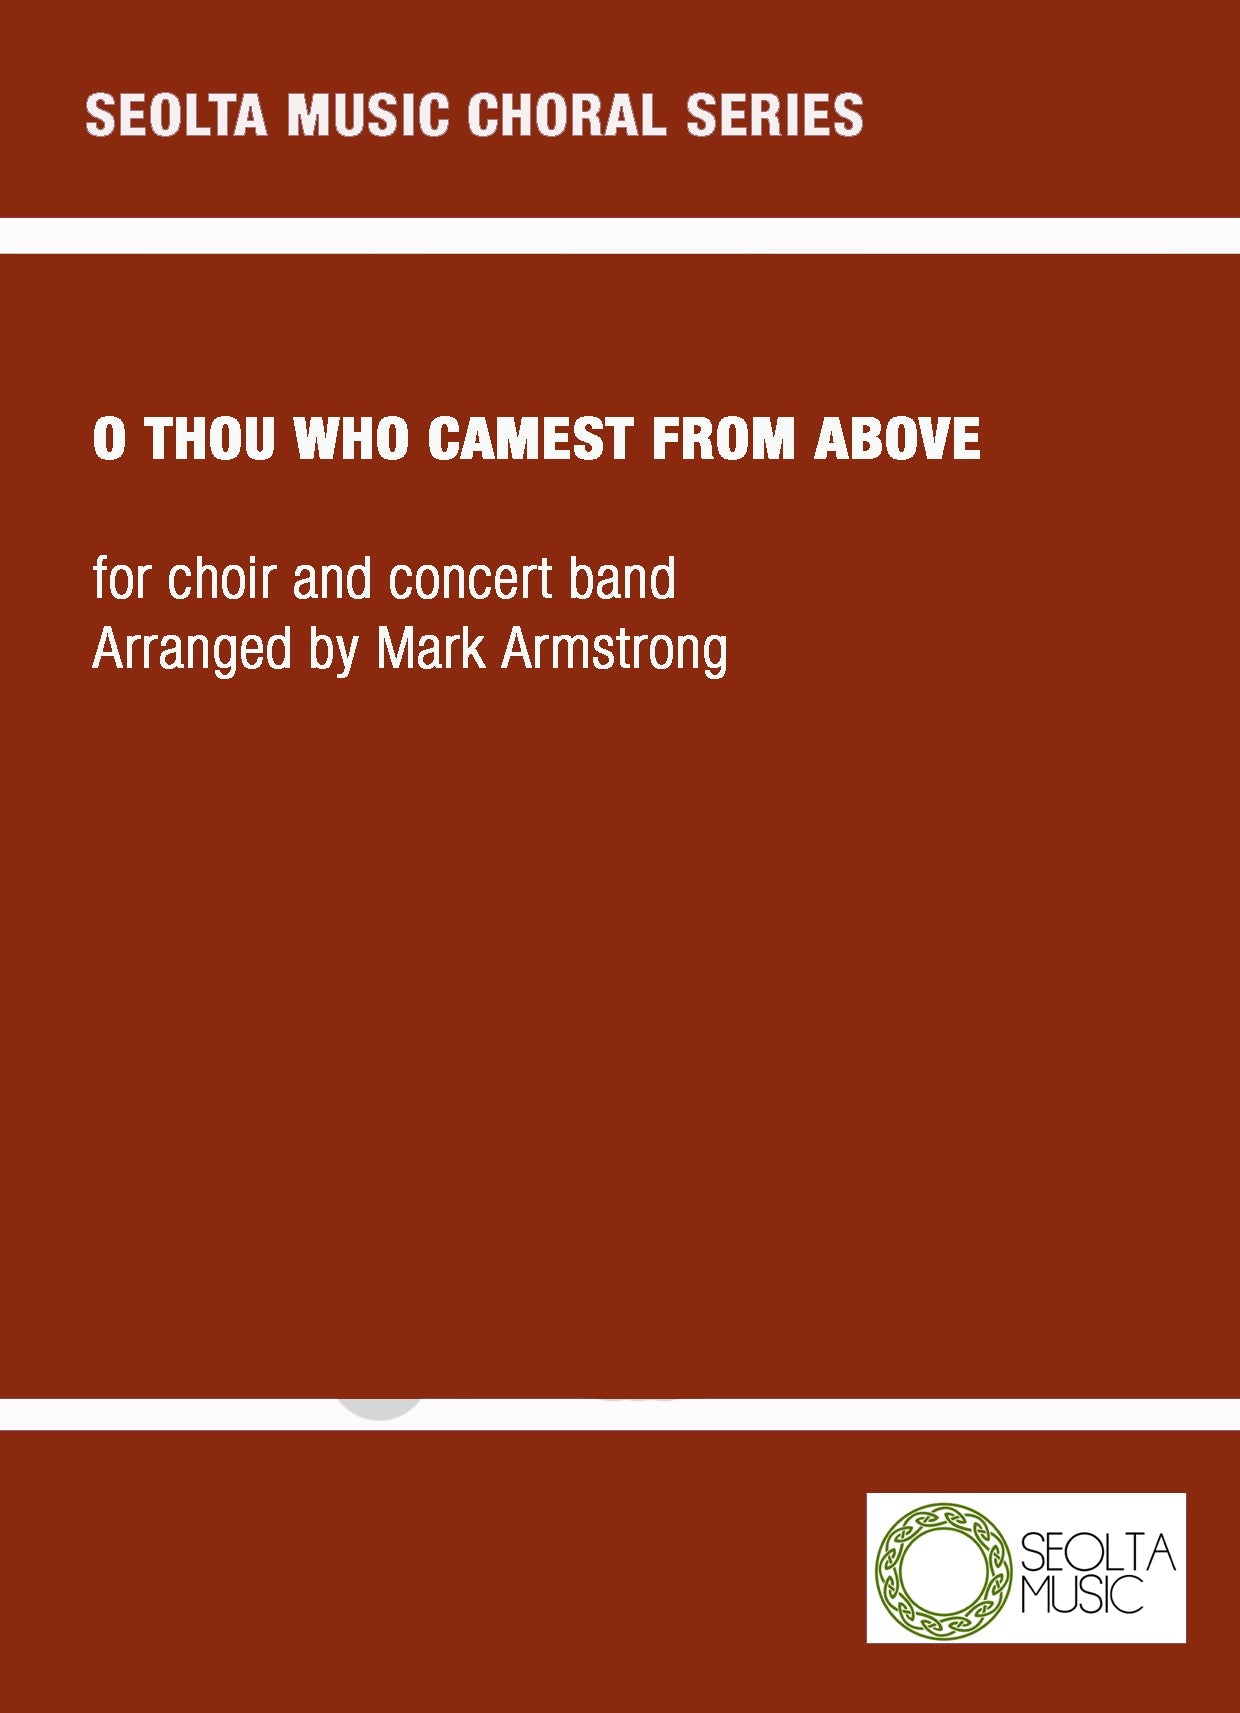 o-thou-who-camest-from-above-hymn-choir-band-sheet-music